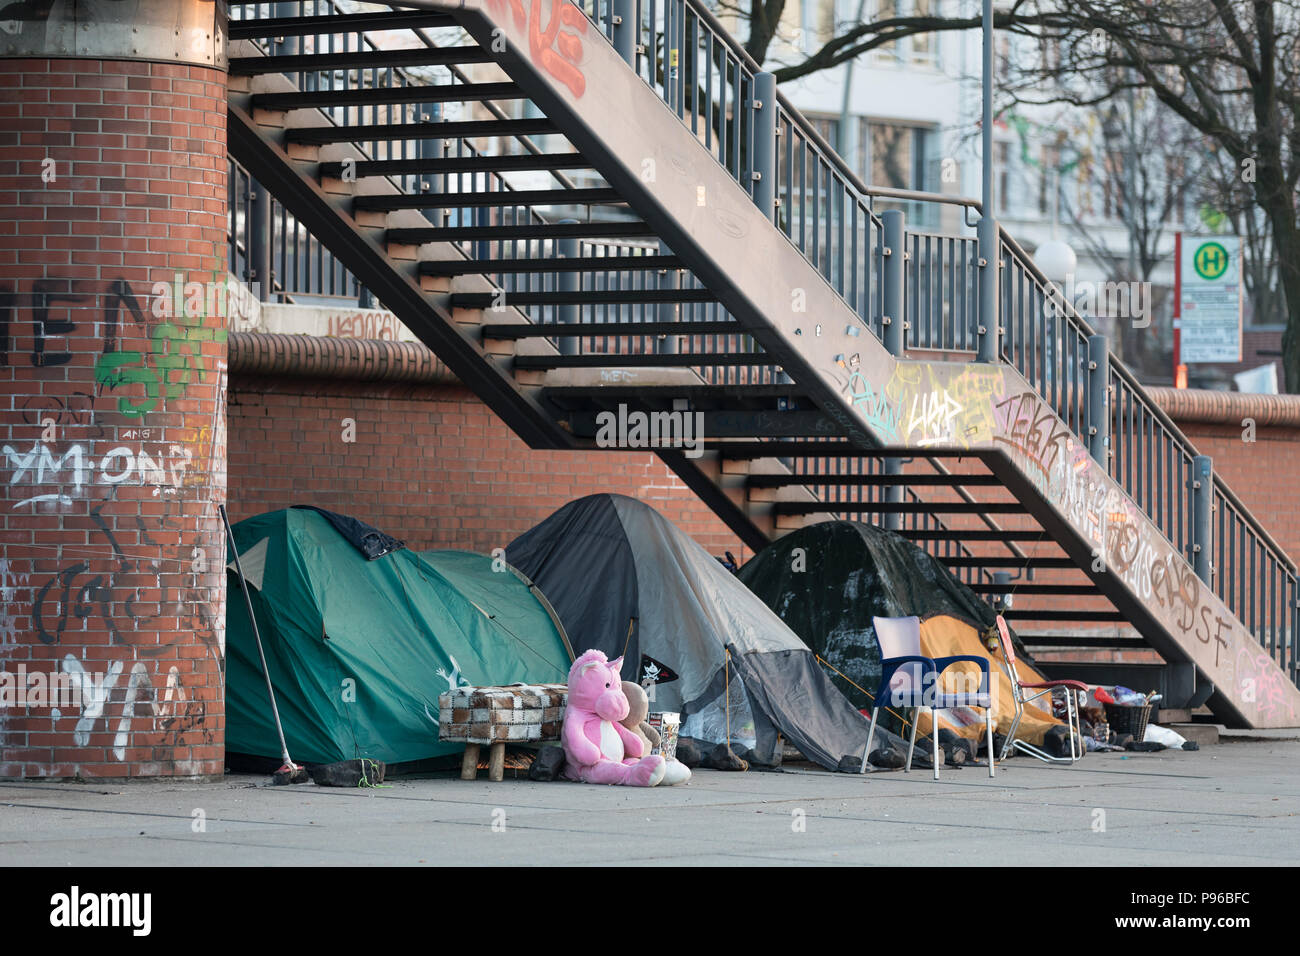 tents of homeless people in Hamburg Stock Photo